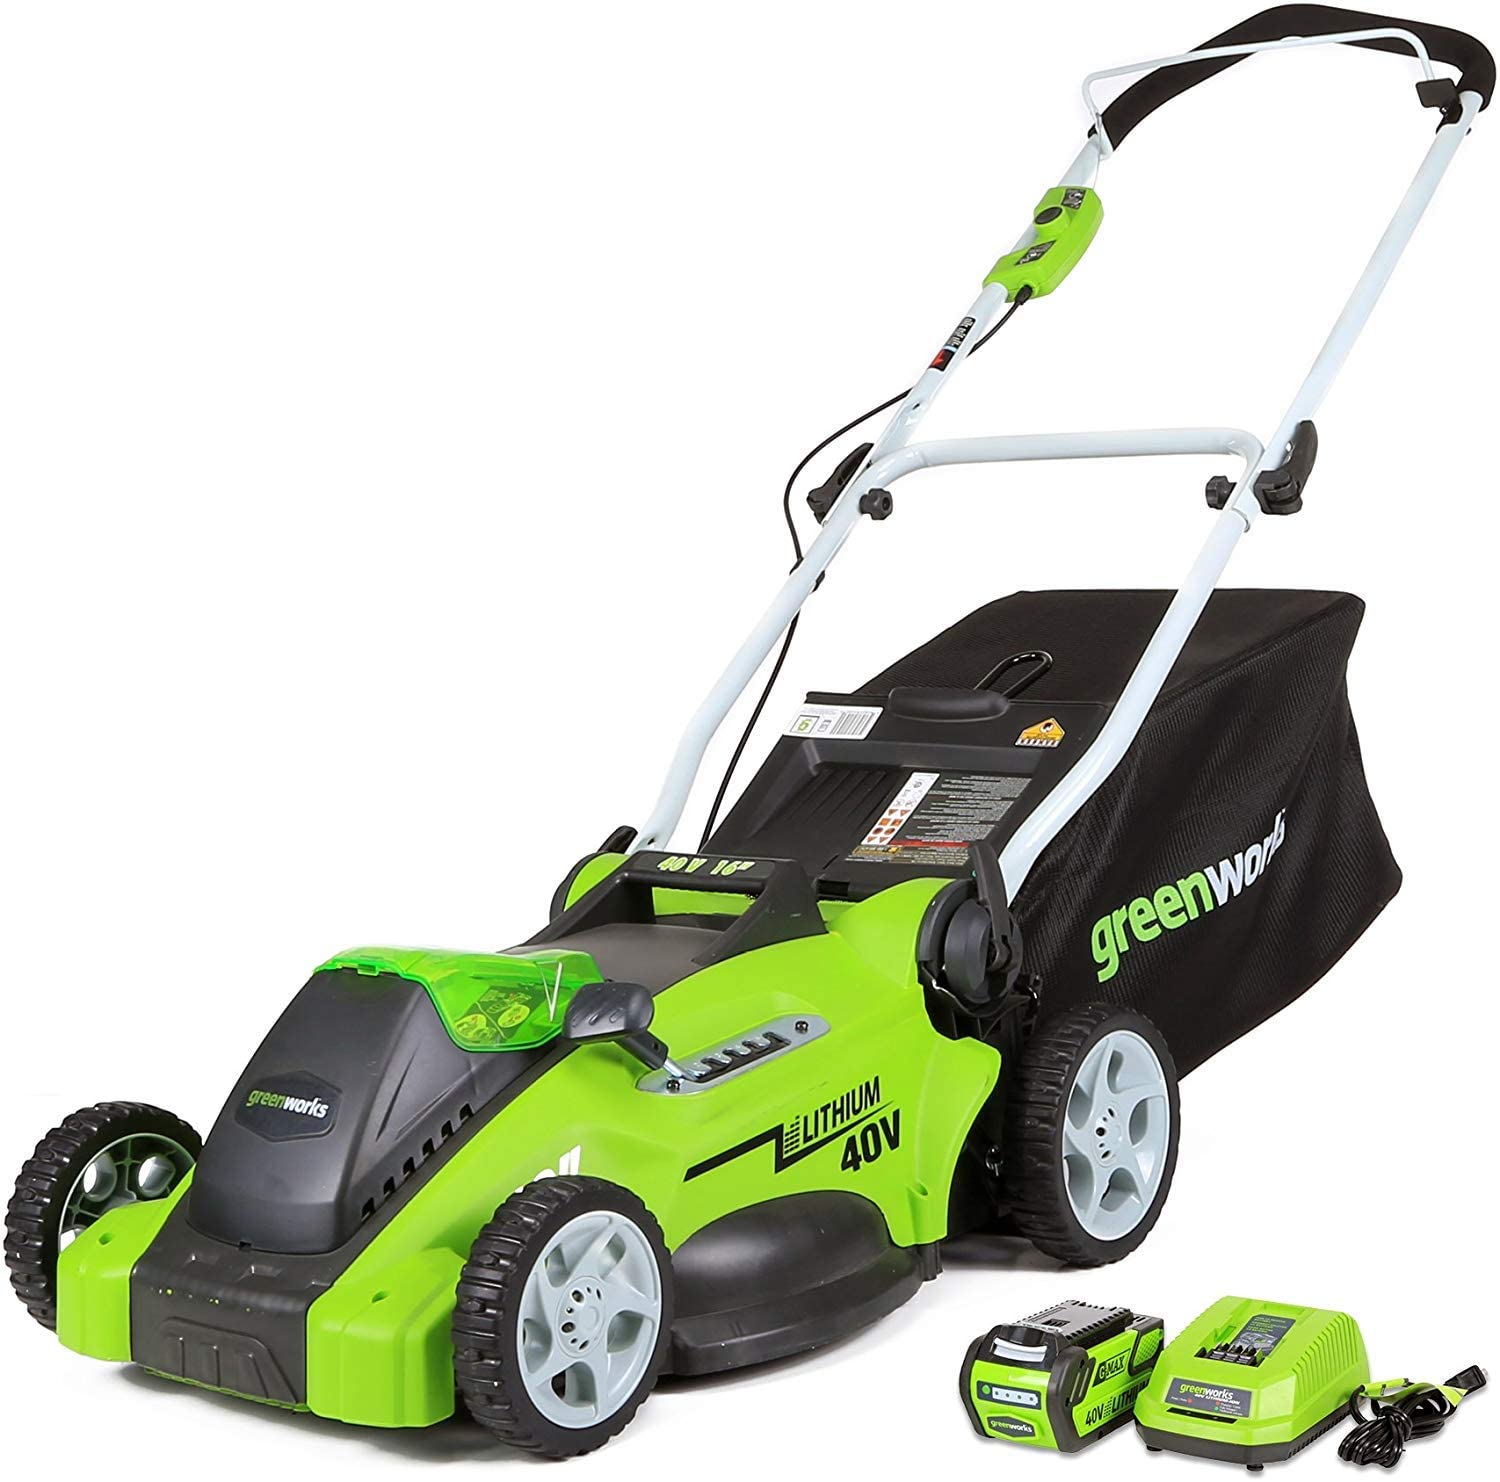 Greenworks G-MAX 40V 16'' Cordless Lawn Mower with 4Ah Battery - 25322 model